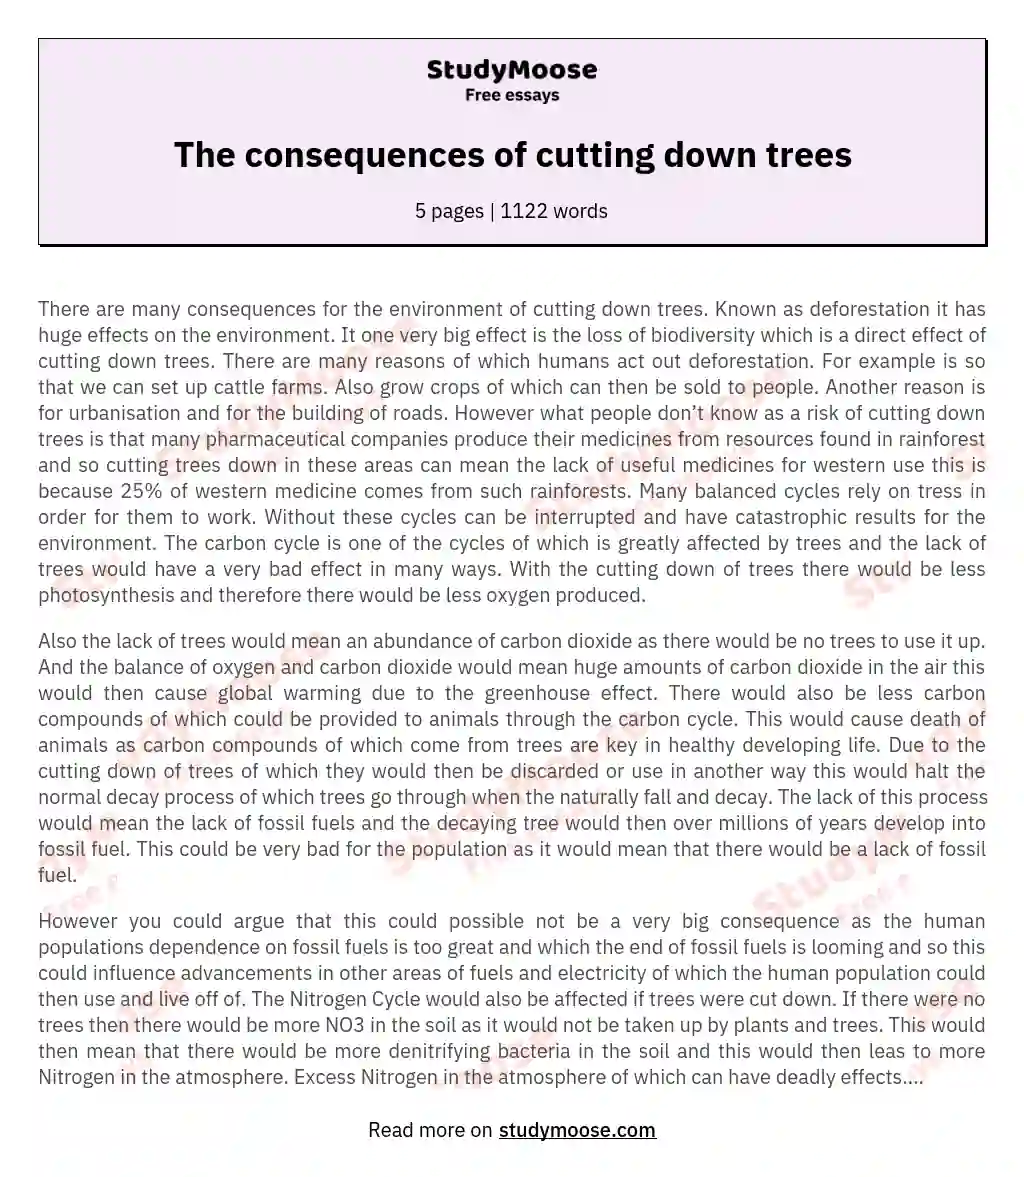 The consequences of cutting down trees essay